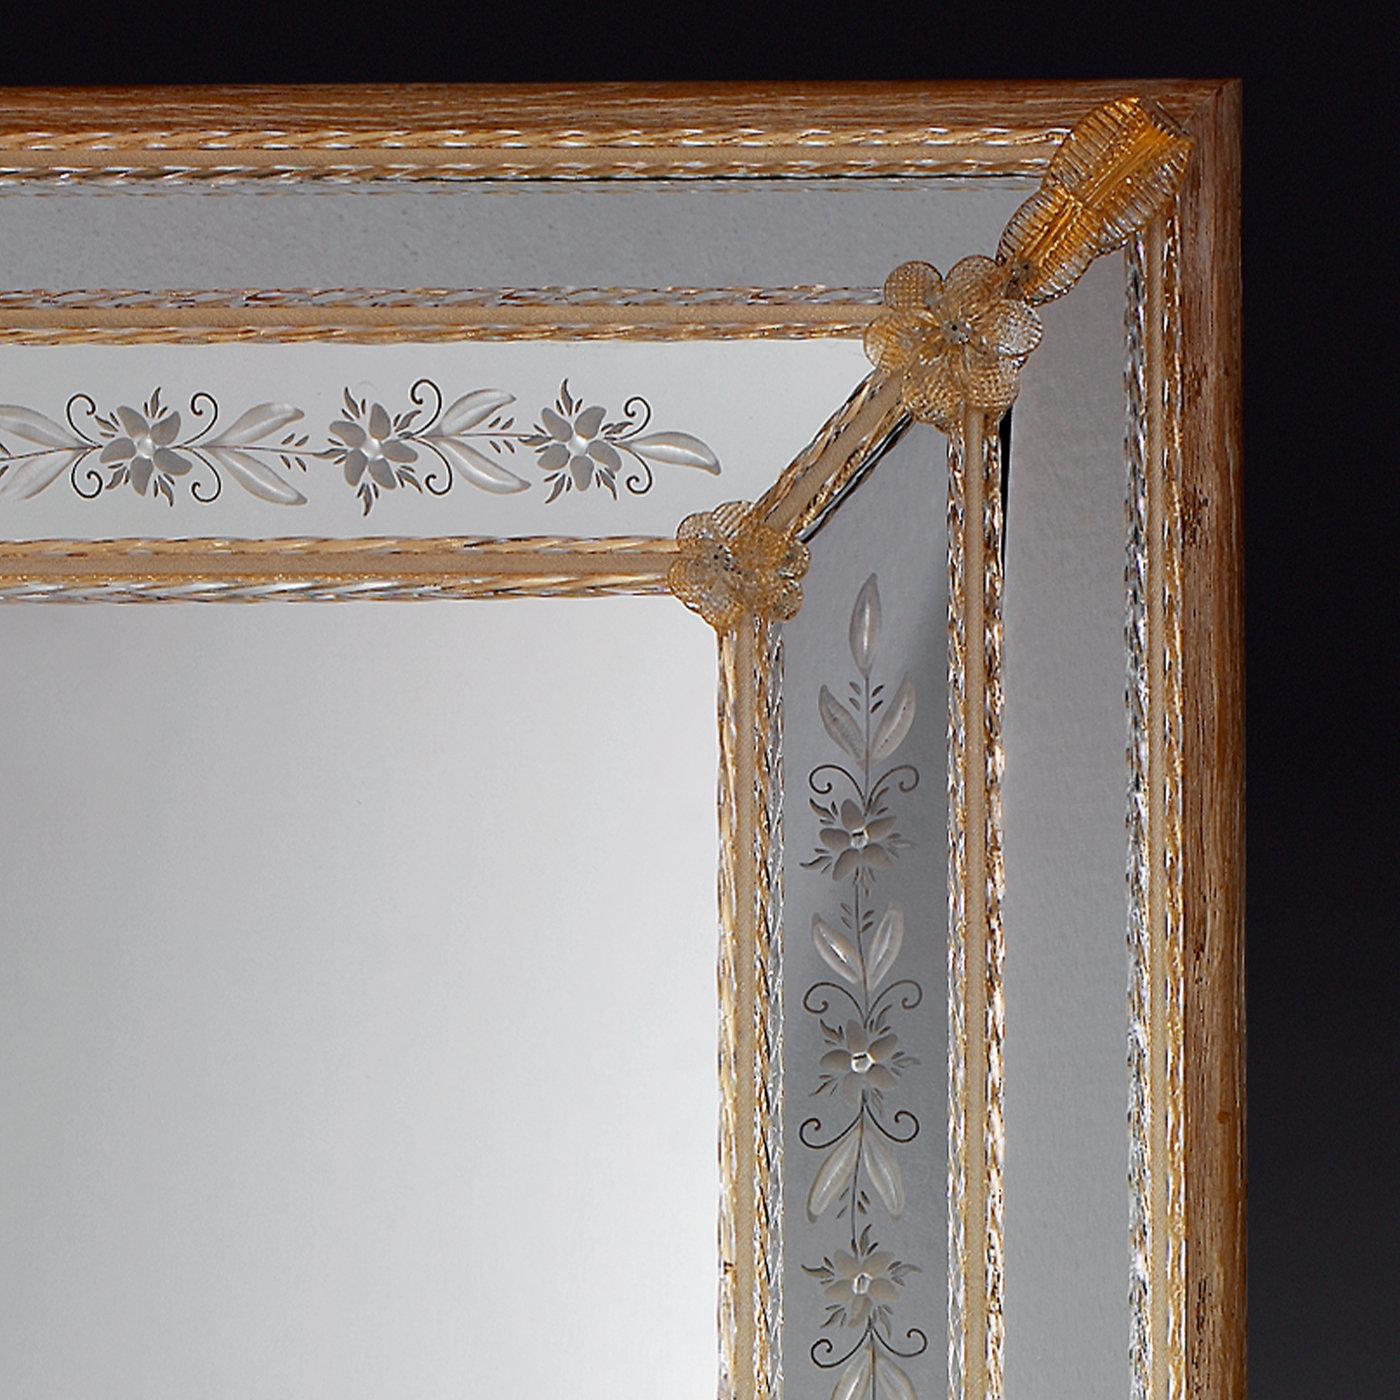 This superb, handmade mirror will stand out on any wall, simultaneously playing a decorative and functional role thanks to its ornate design. Floral motifs are meticulously etched into the inner section in mirrored glass, their naturalistic